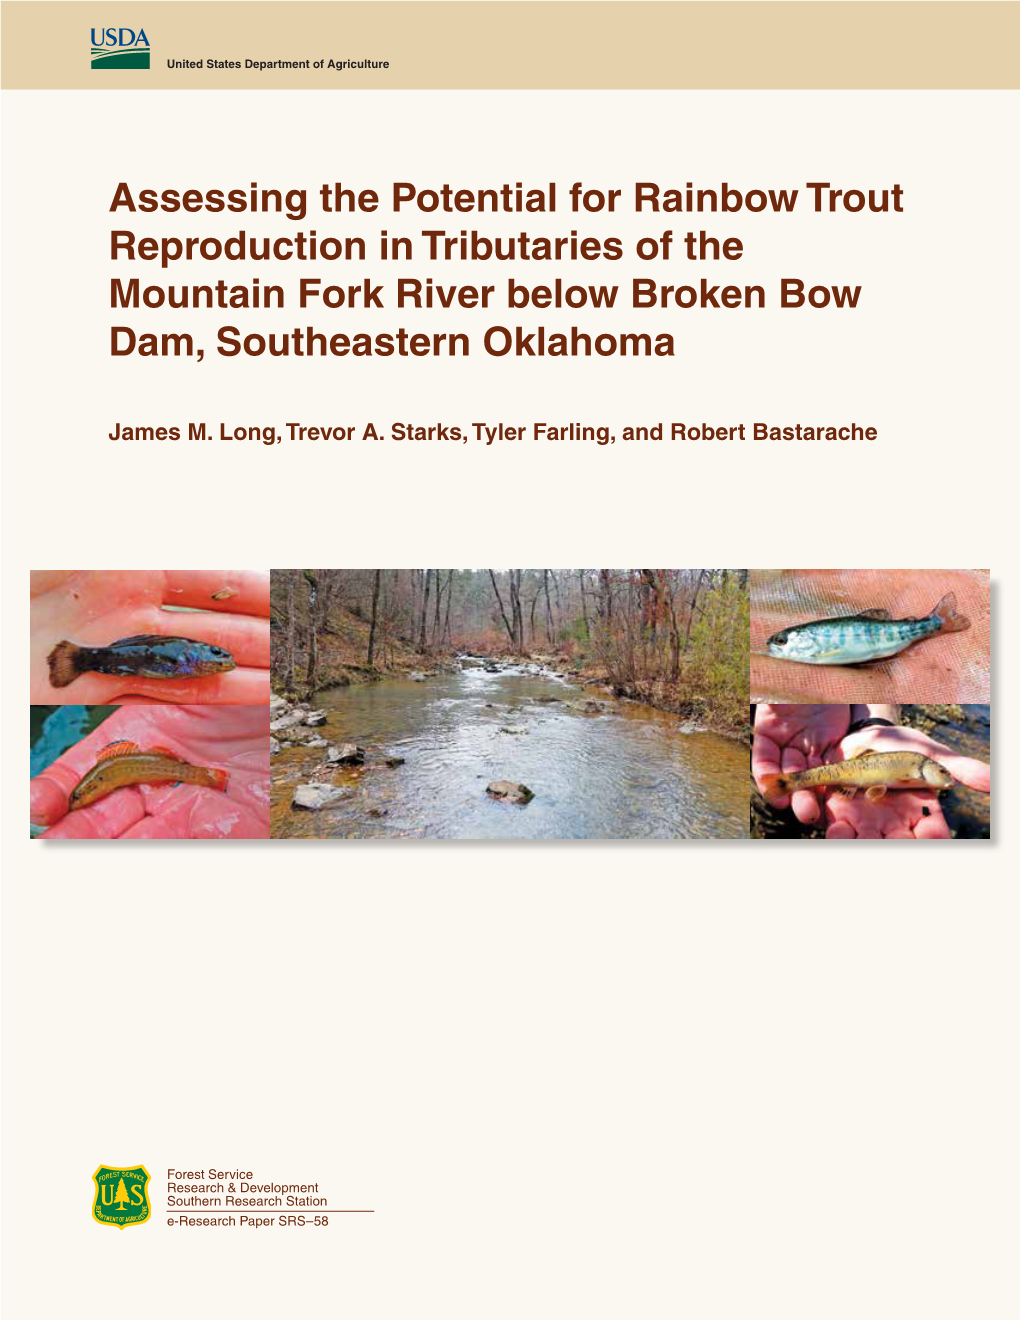 Assessing the Potential for Rainbow Trout Reproduction in Tributaries of the Mountain Fork River Below Broken Bow Dam, Southeastern Oklahoma